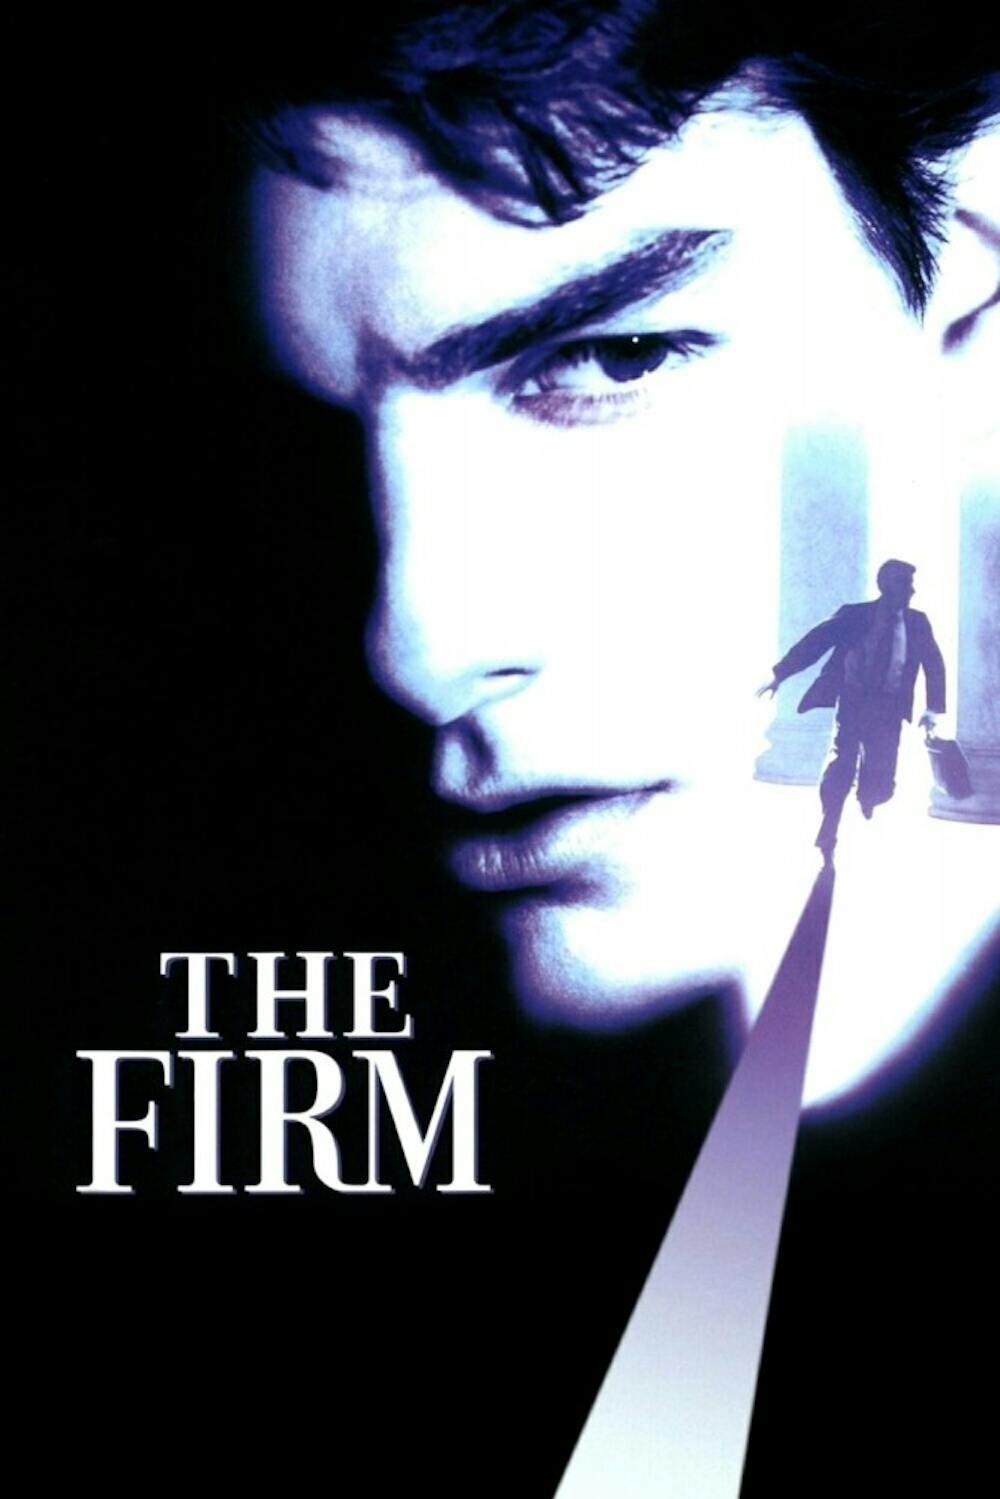 Originally released in 1993,&nbsp;"The Firm" has an impressive cast, impeccable soundtrack and plot from the innovative thriller subgenre.&nbsp;